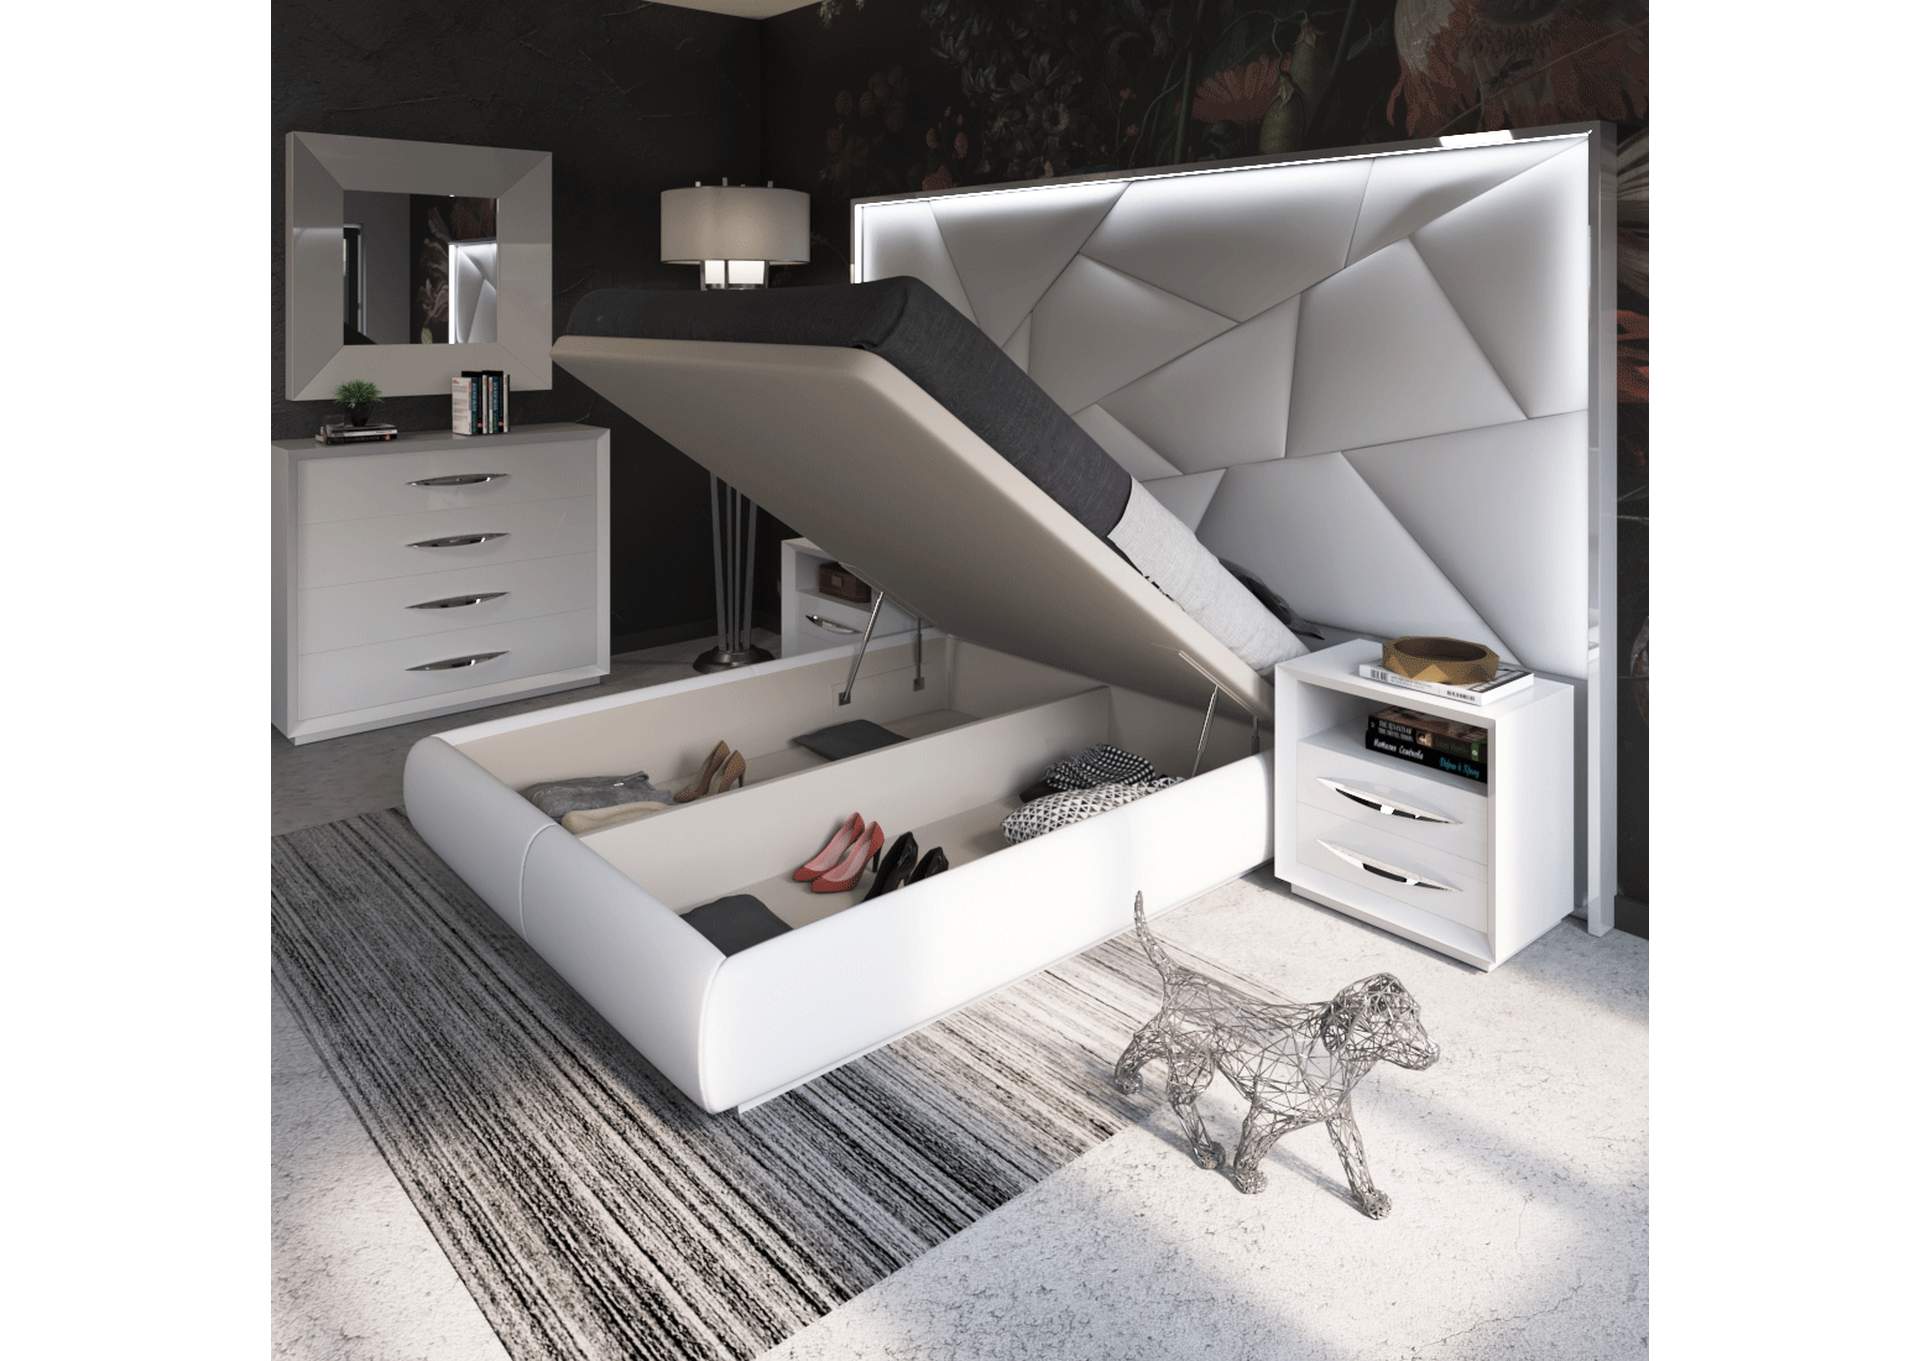 Majesty Bedroom with Light And Carmen Cases SET,ESF Wholesale Furniture